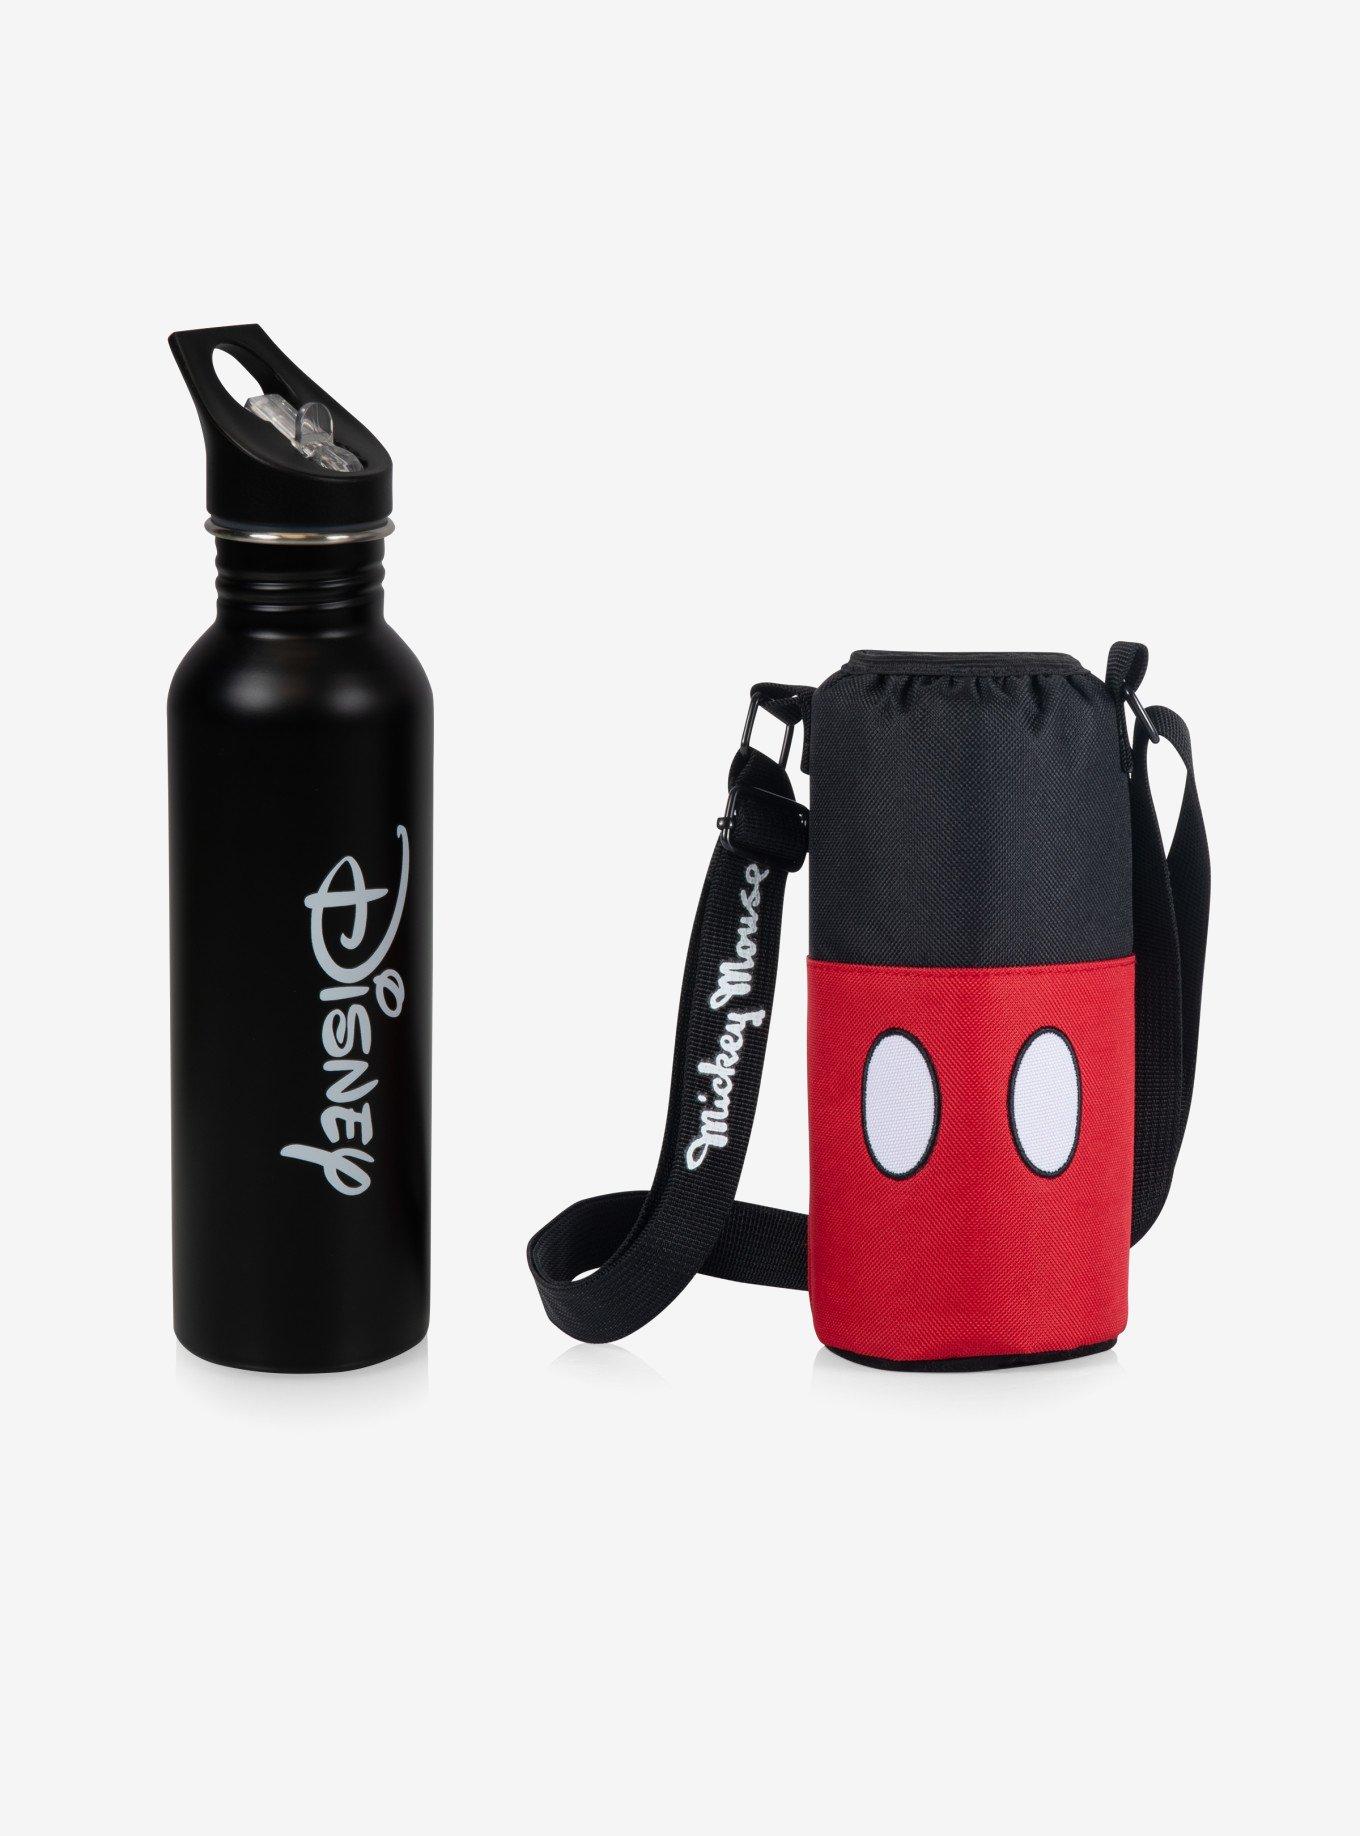 Disney Mickey Mouse Water Bottle with Cooler Tote